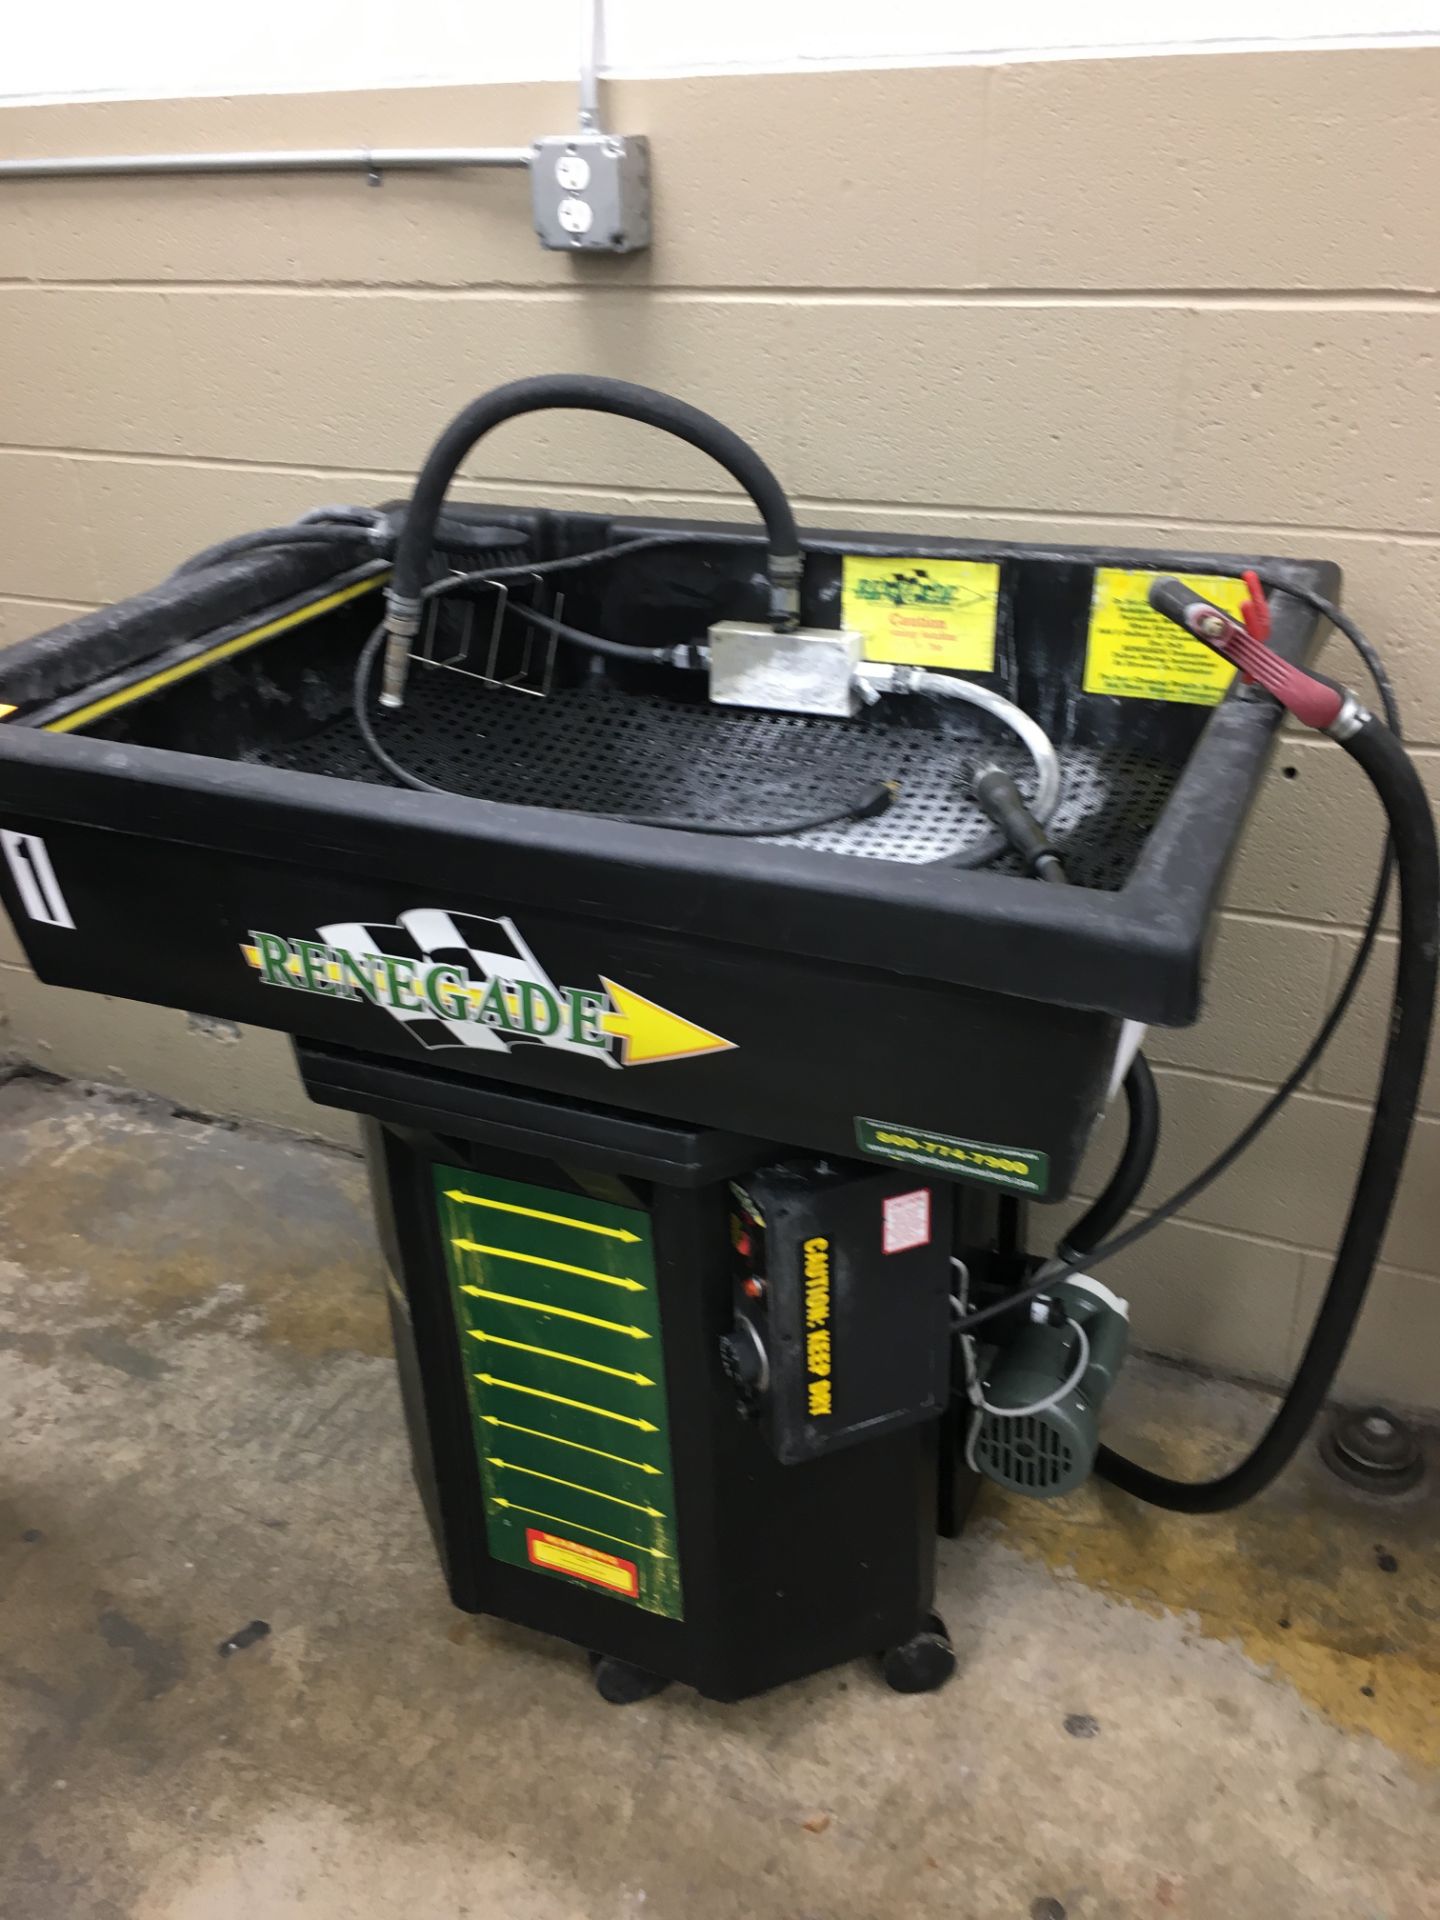 SERVICE LINE # RENEGADE-TMB-4000 PORTABLE ''SOLVENT FREE'' PARTS WASHER, (NEW 2014)